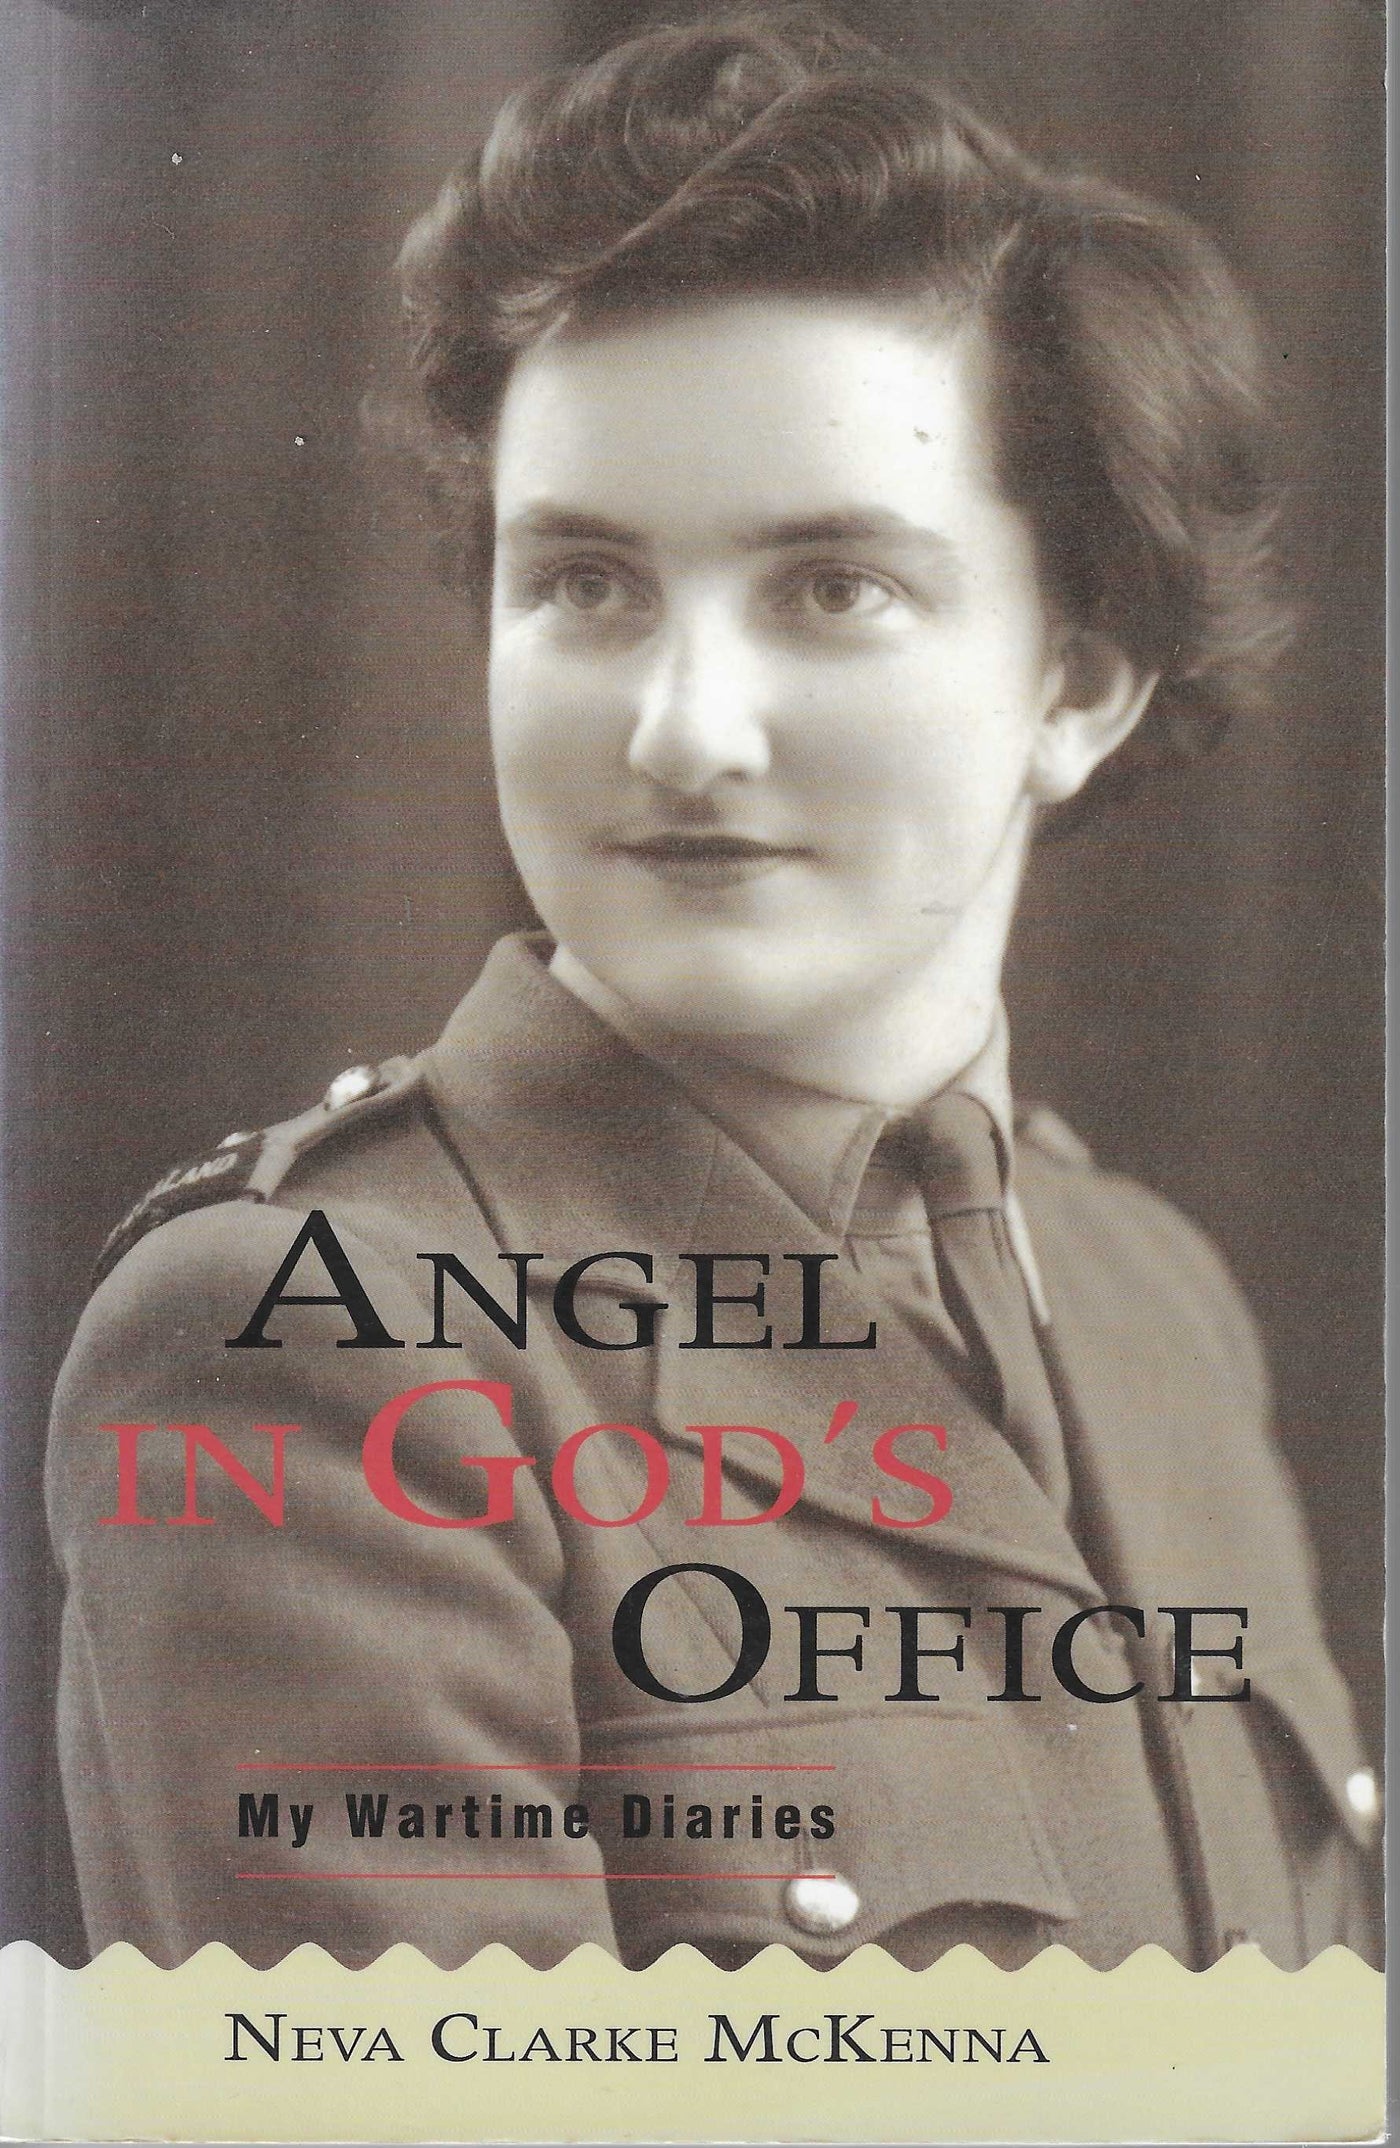 Angel in God's office: My Wartime Diaries